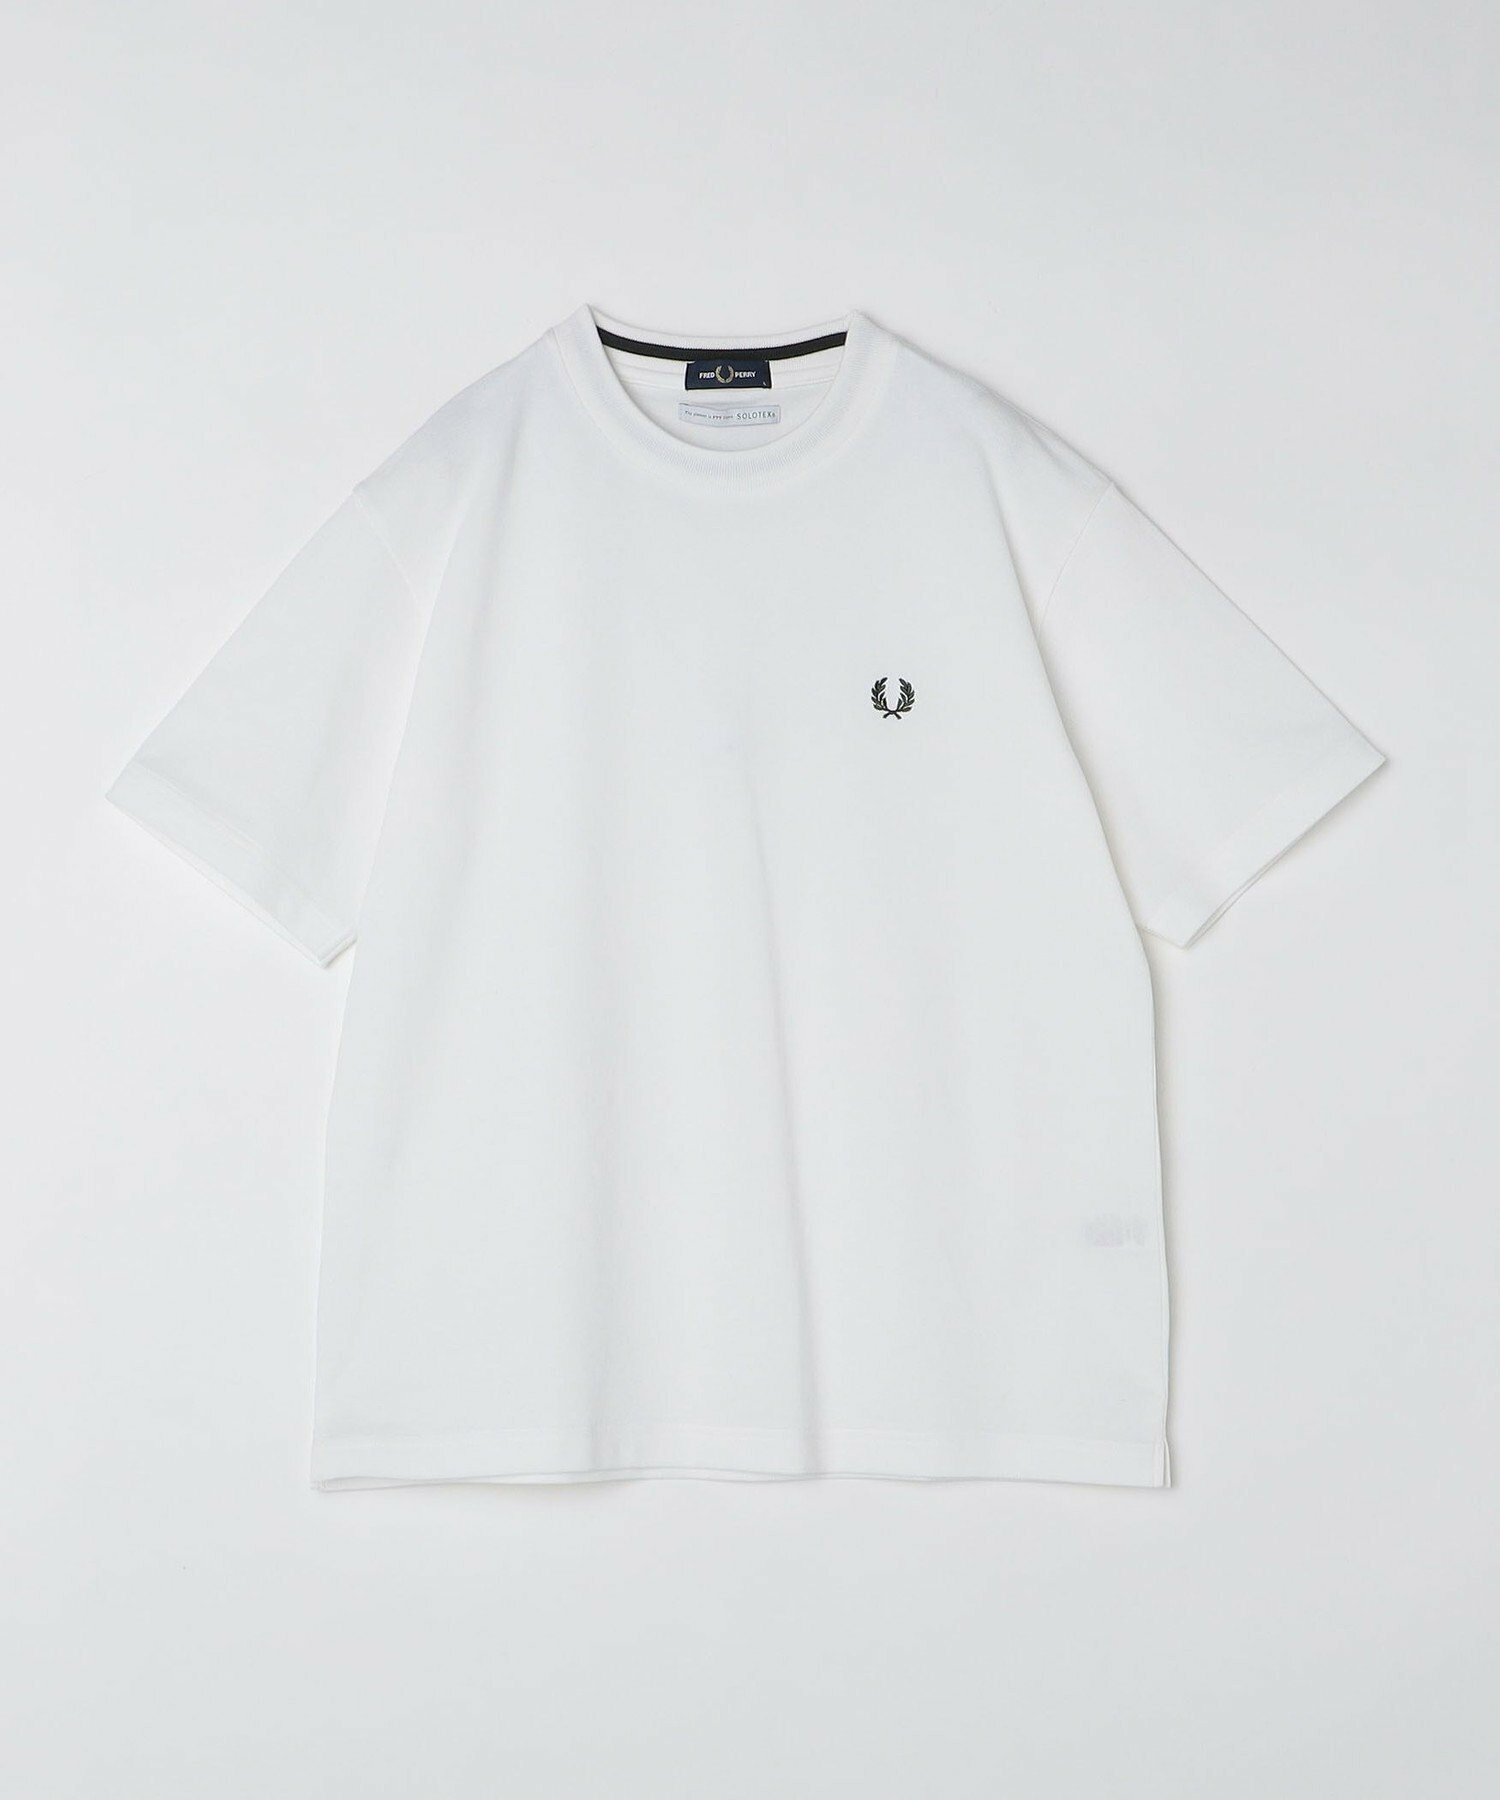 【SHIPS別注】FRED PERRY: SOLOTEX(R) 鹿の子 ワンポイント ロゴ Tシャツ24SS